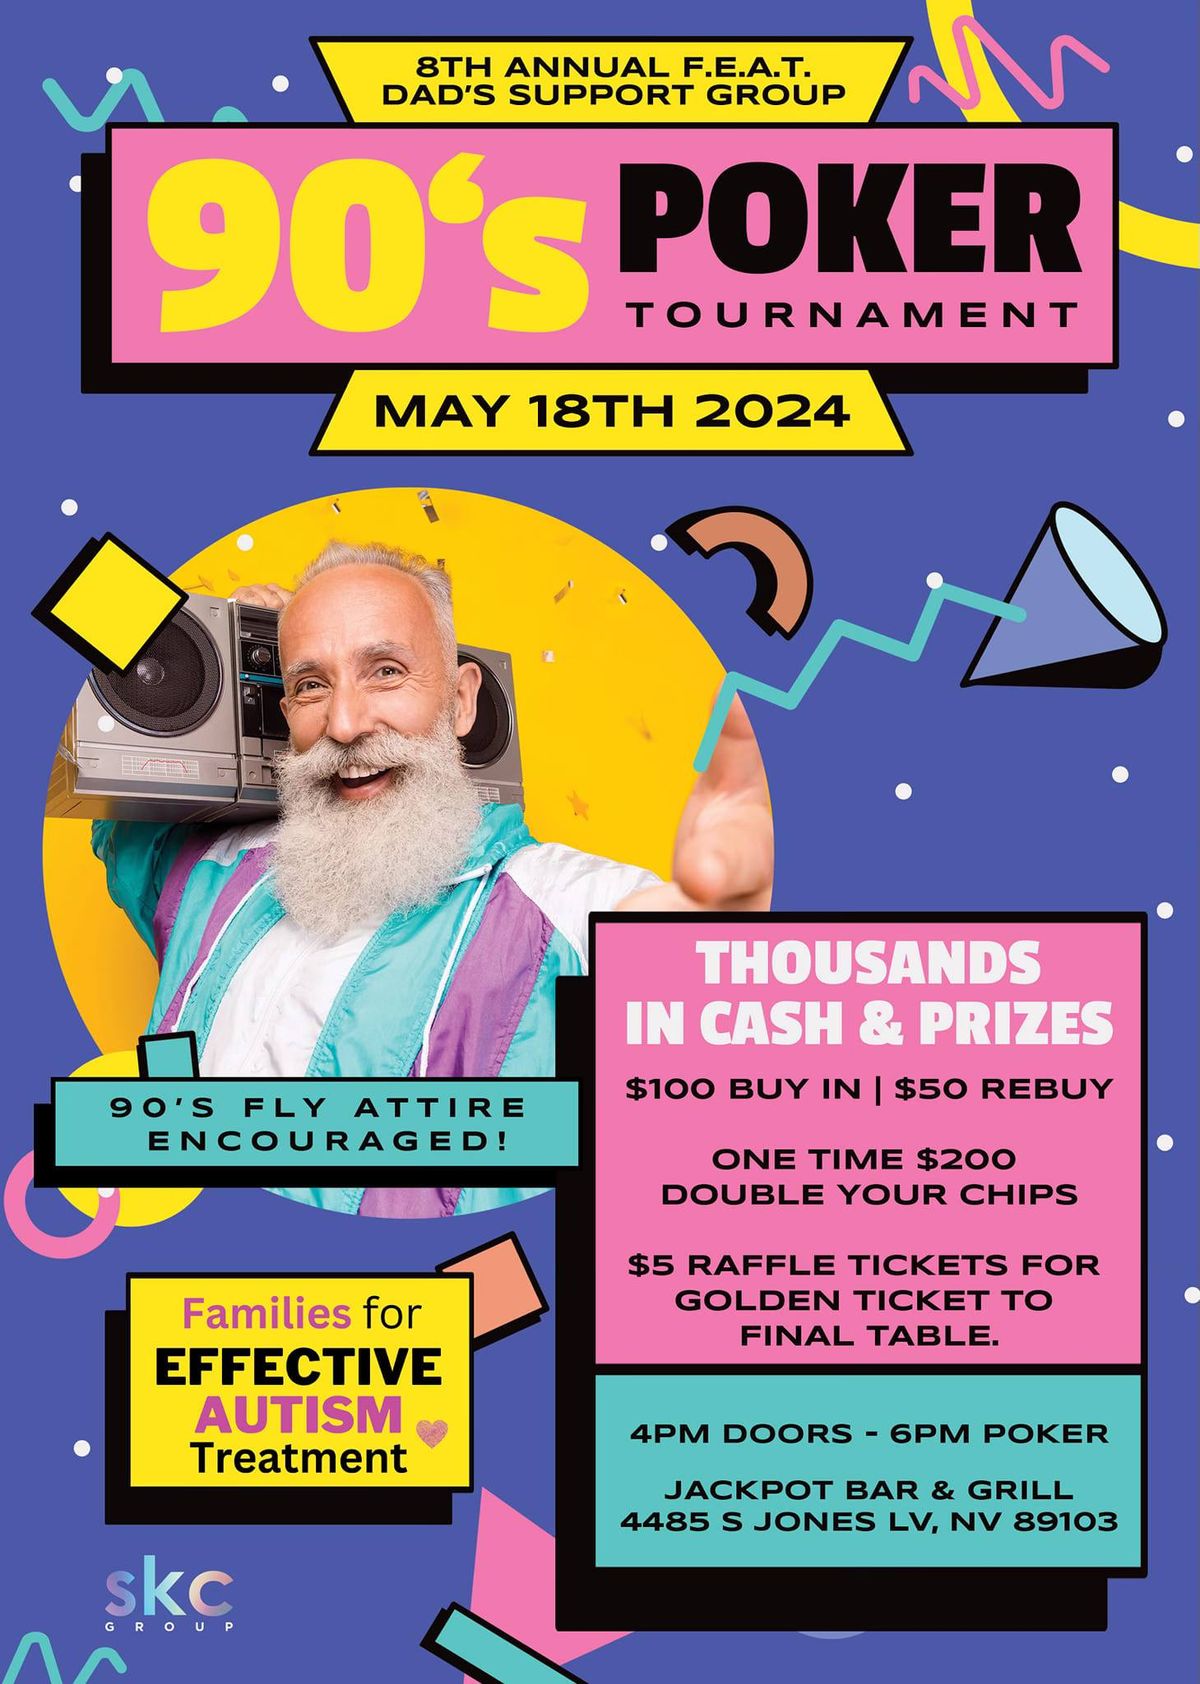 8th Annual FEAT Dad's 90's Poker Tournament